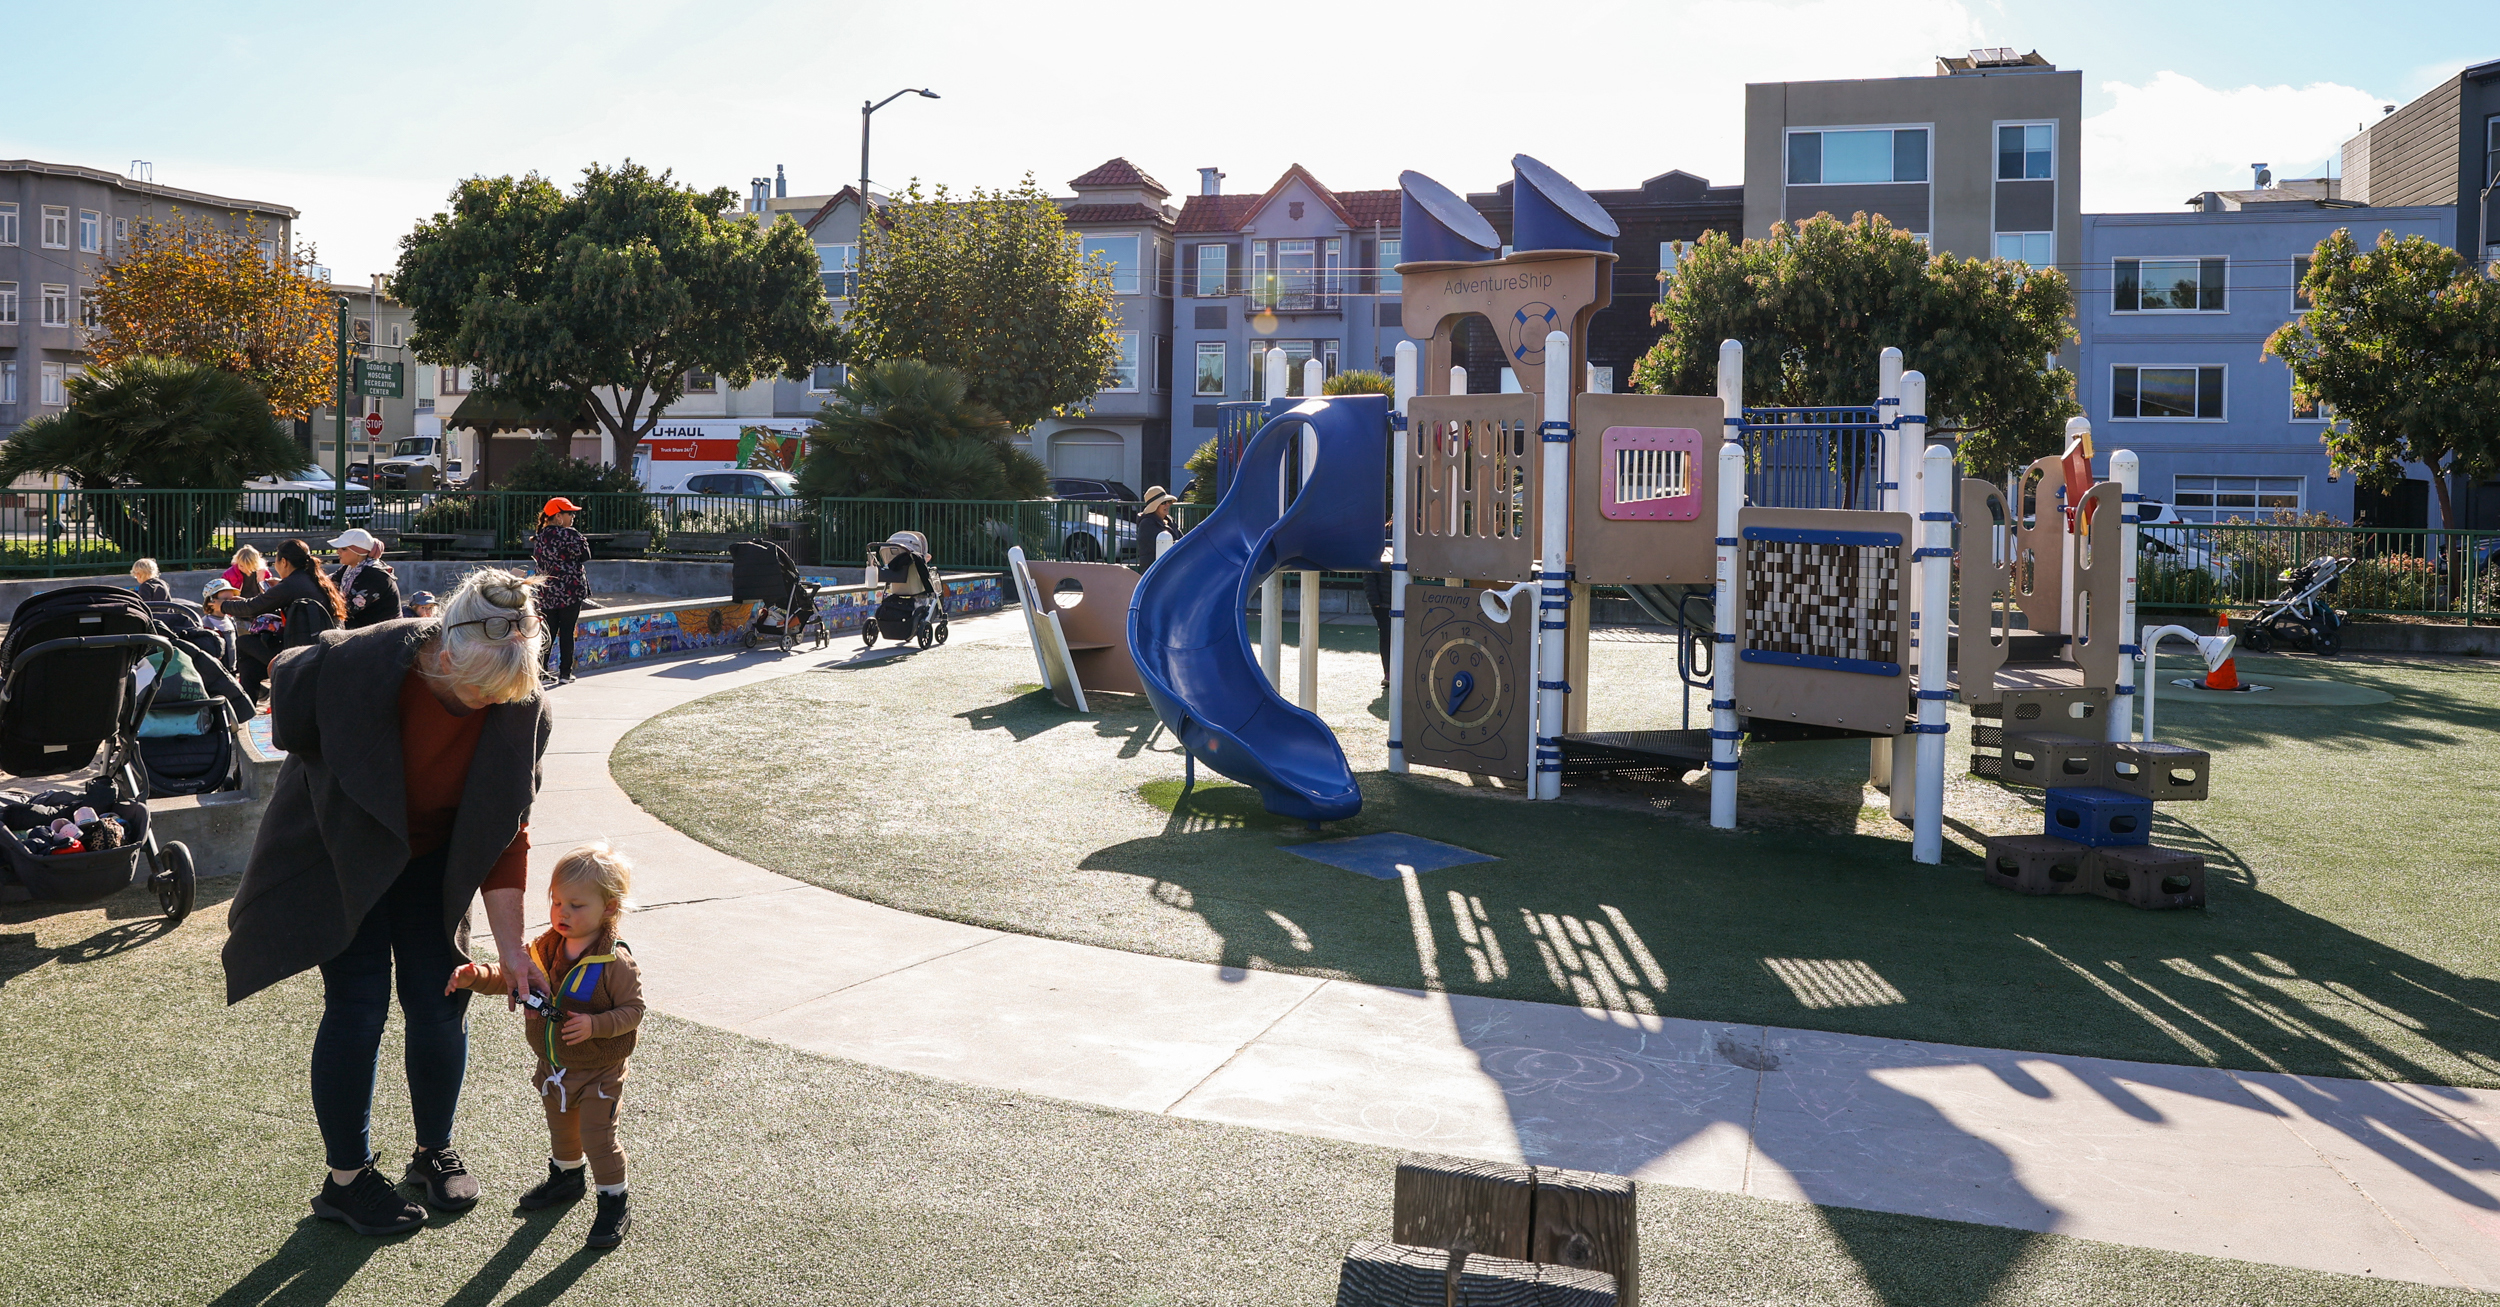 A mother and child stand in front of an outdoor playground in the Marina in San Francisco.